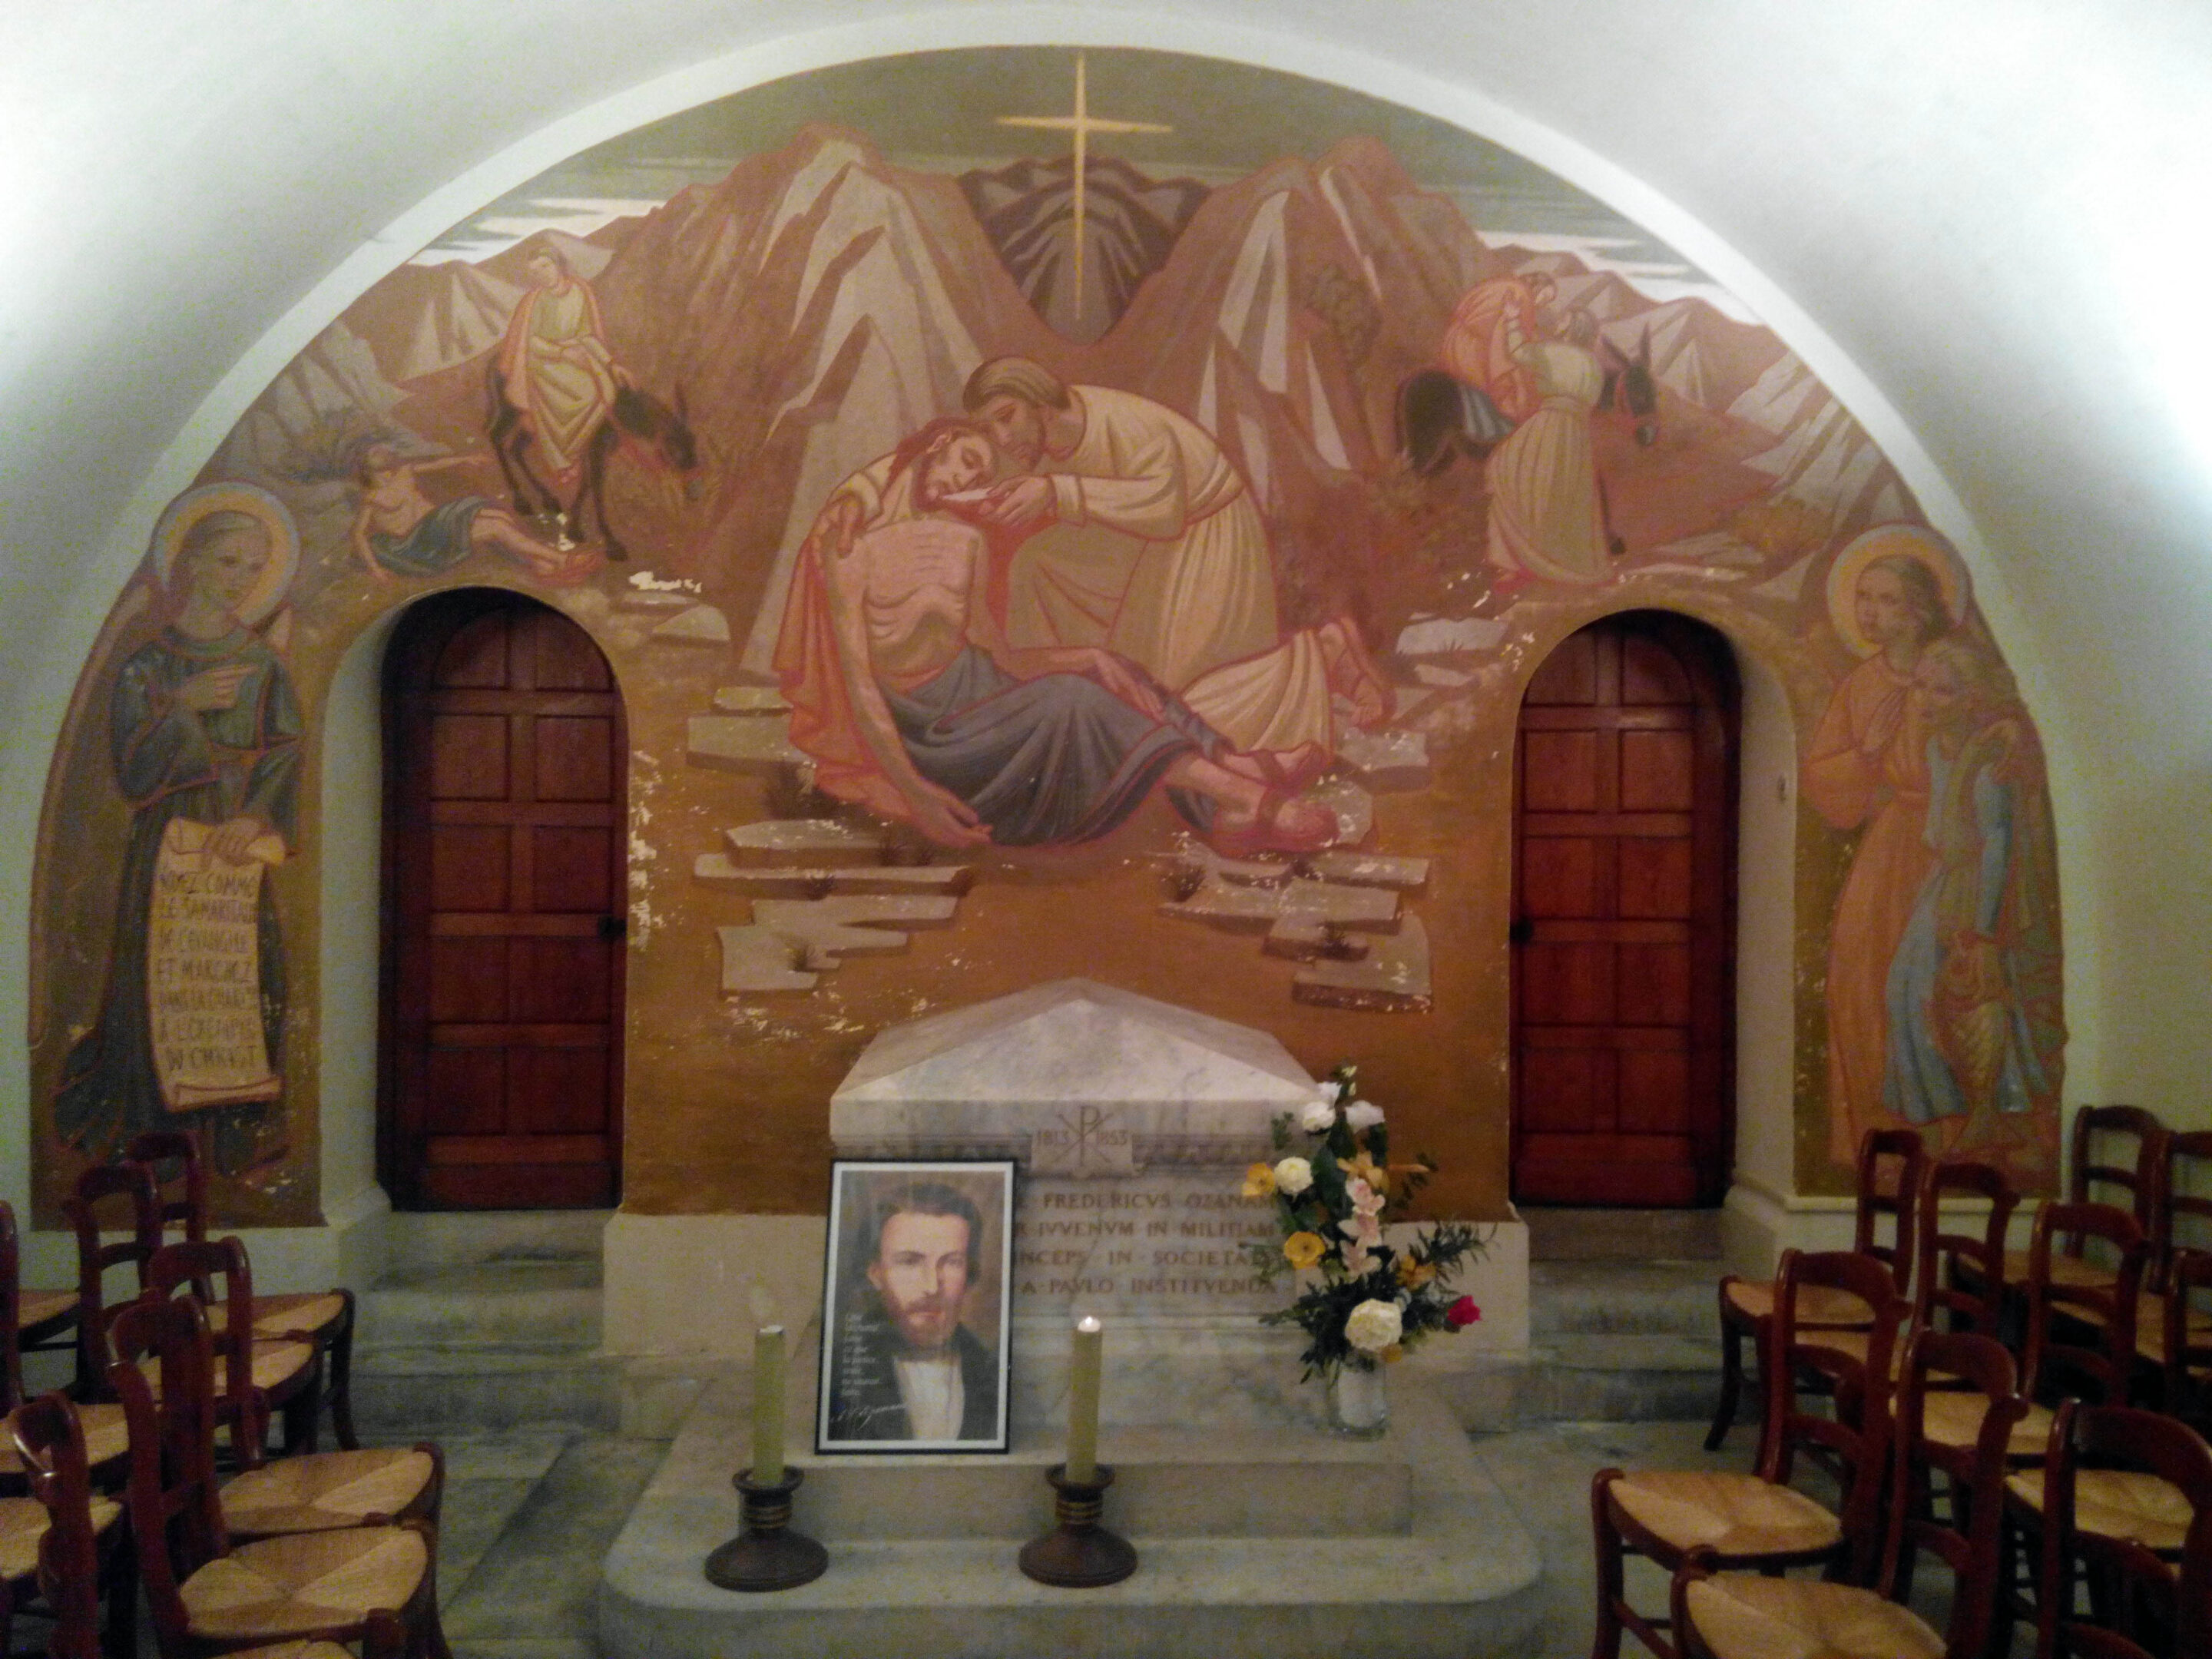 Crypt of Frederic Ozanam as it is today.